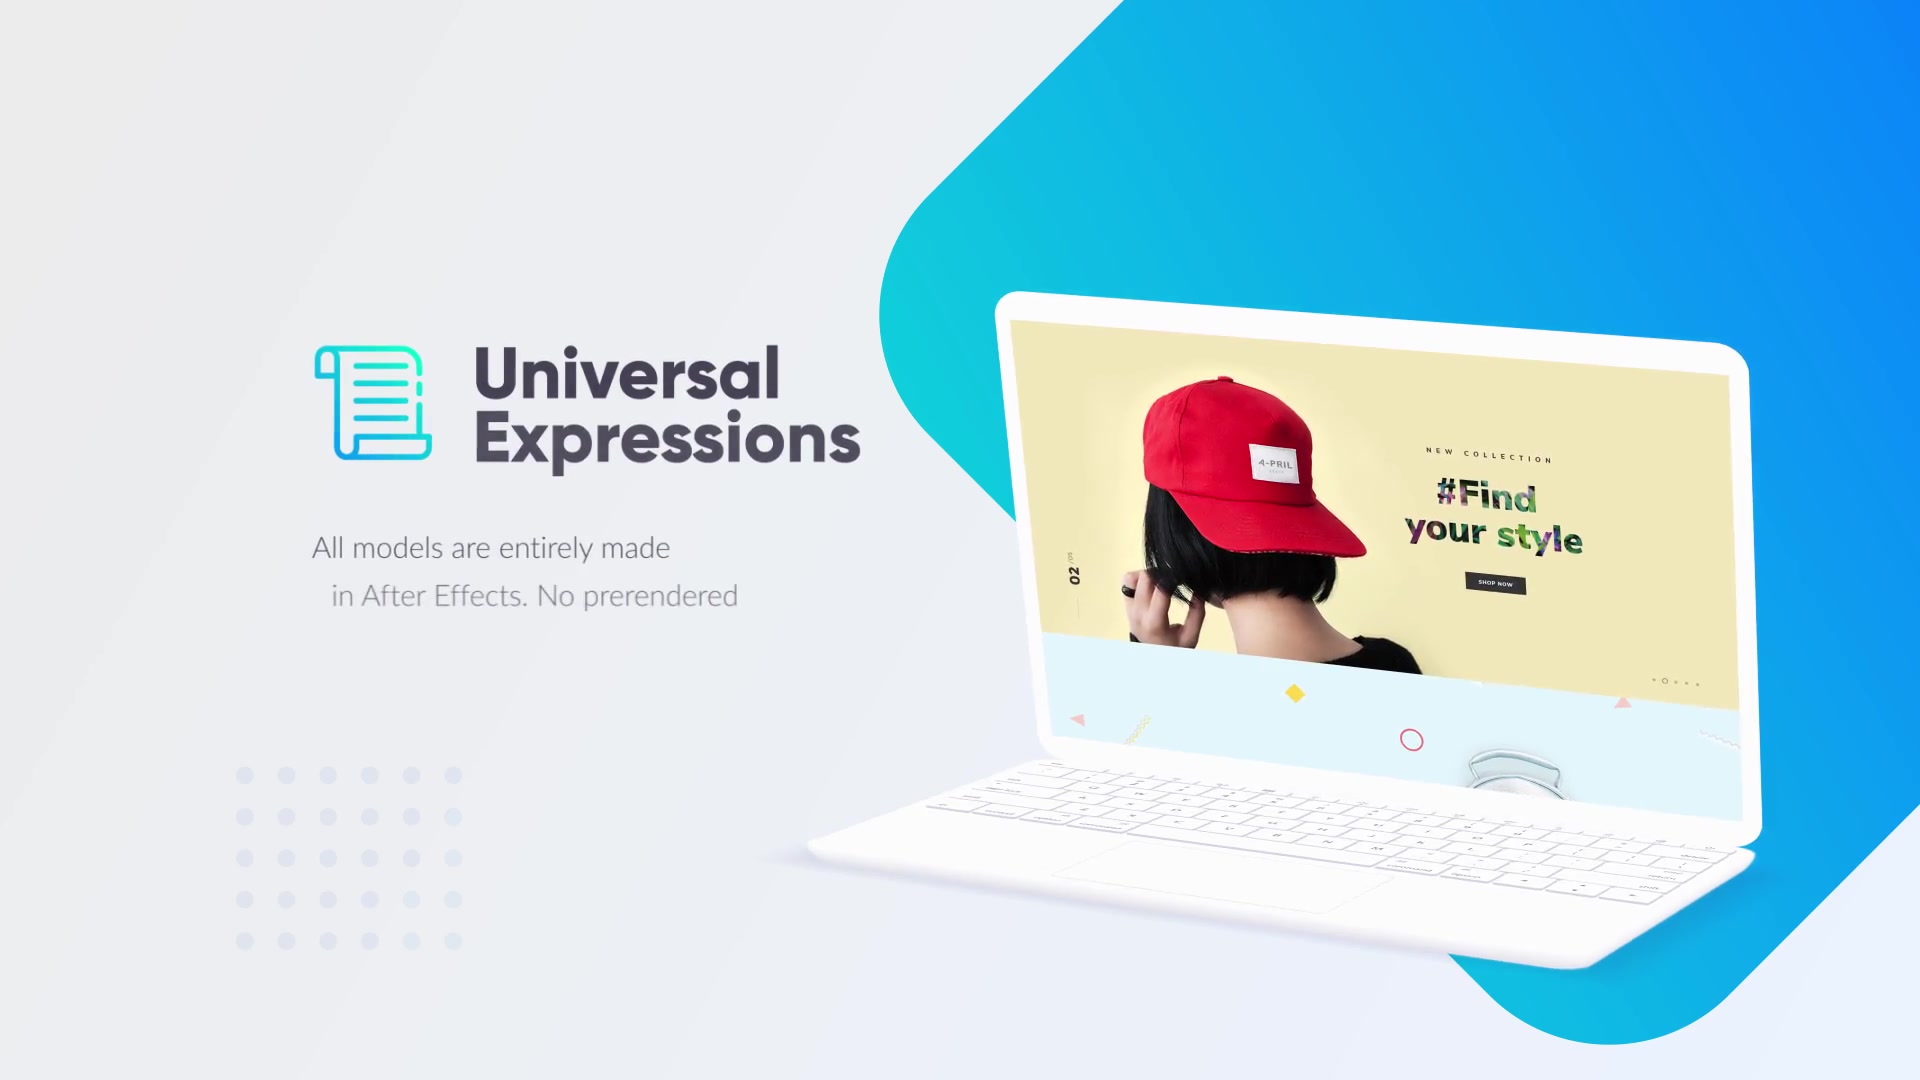 Ui Ux Animated Devices Bundle - Download Videohive 22023040